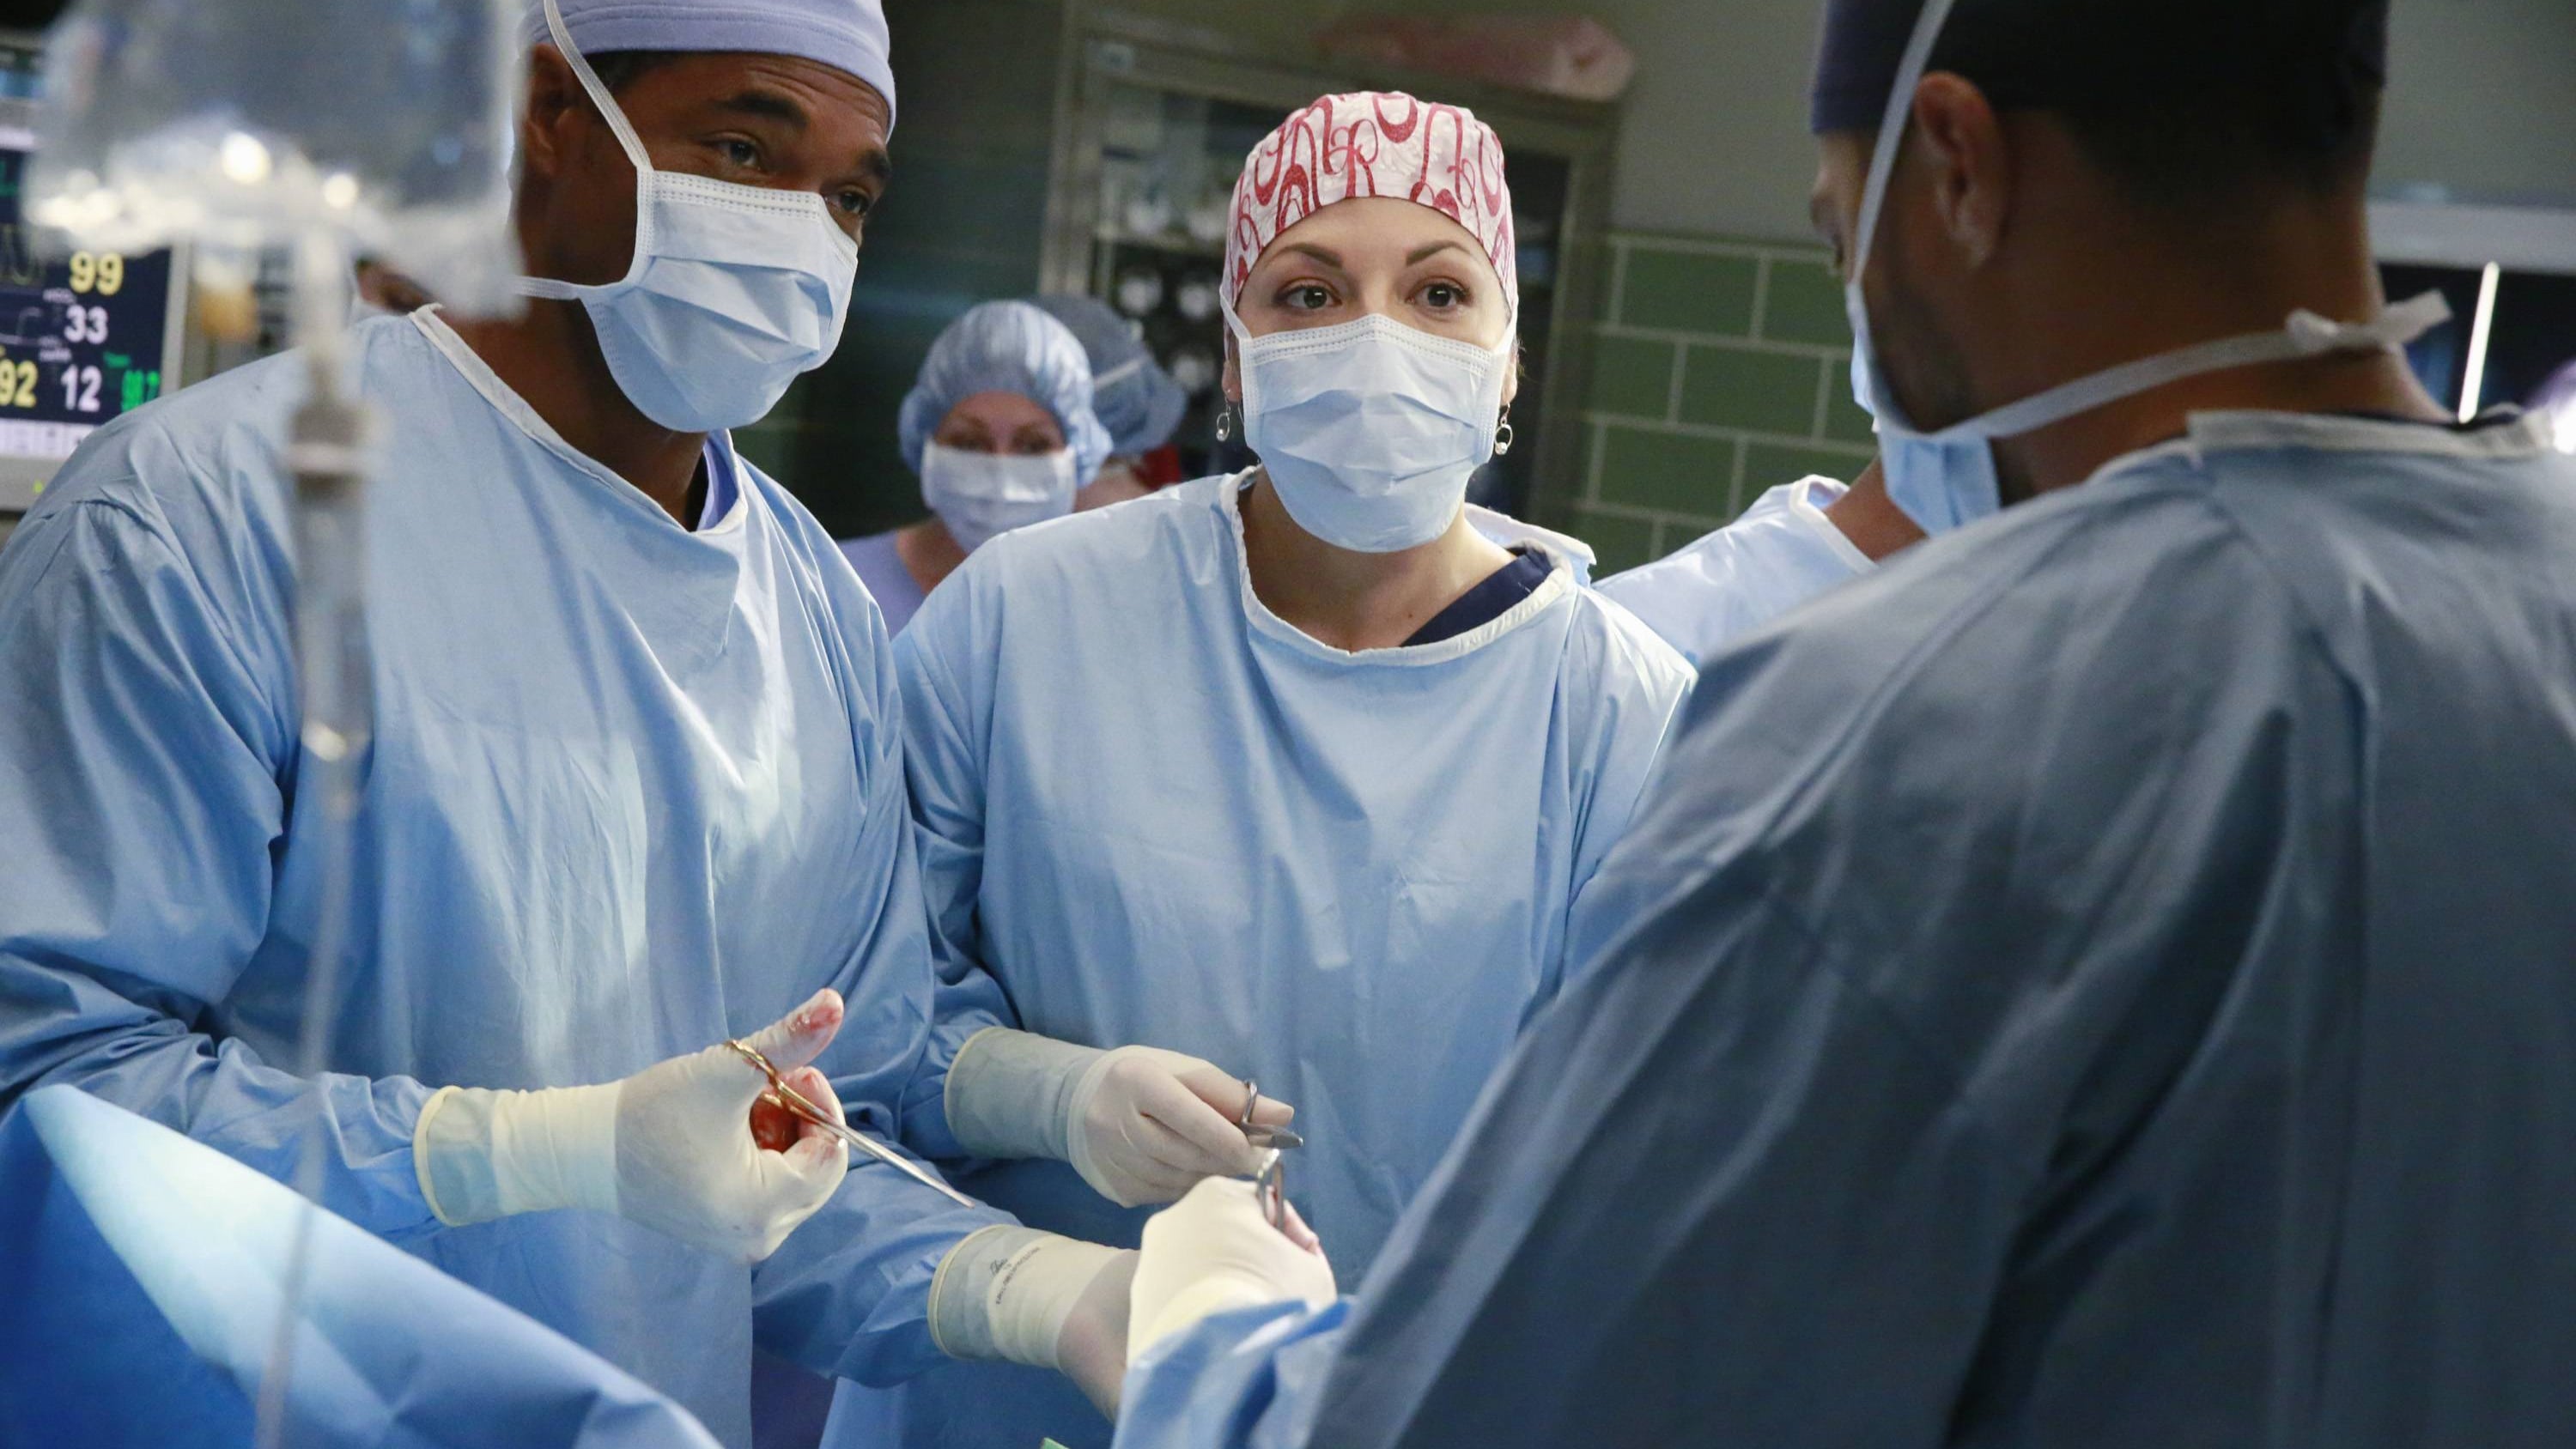 Grey's Anatomy - Season 12 Episode 8 : Things We Lost in the Fire